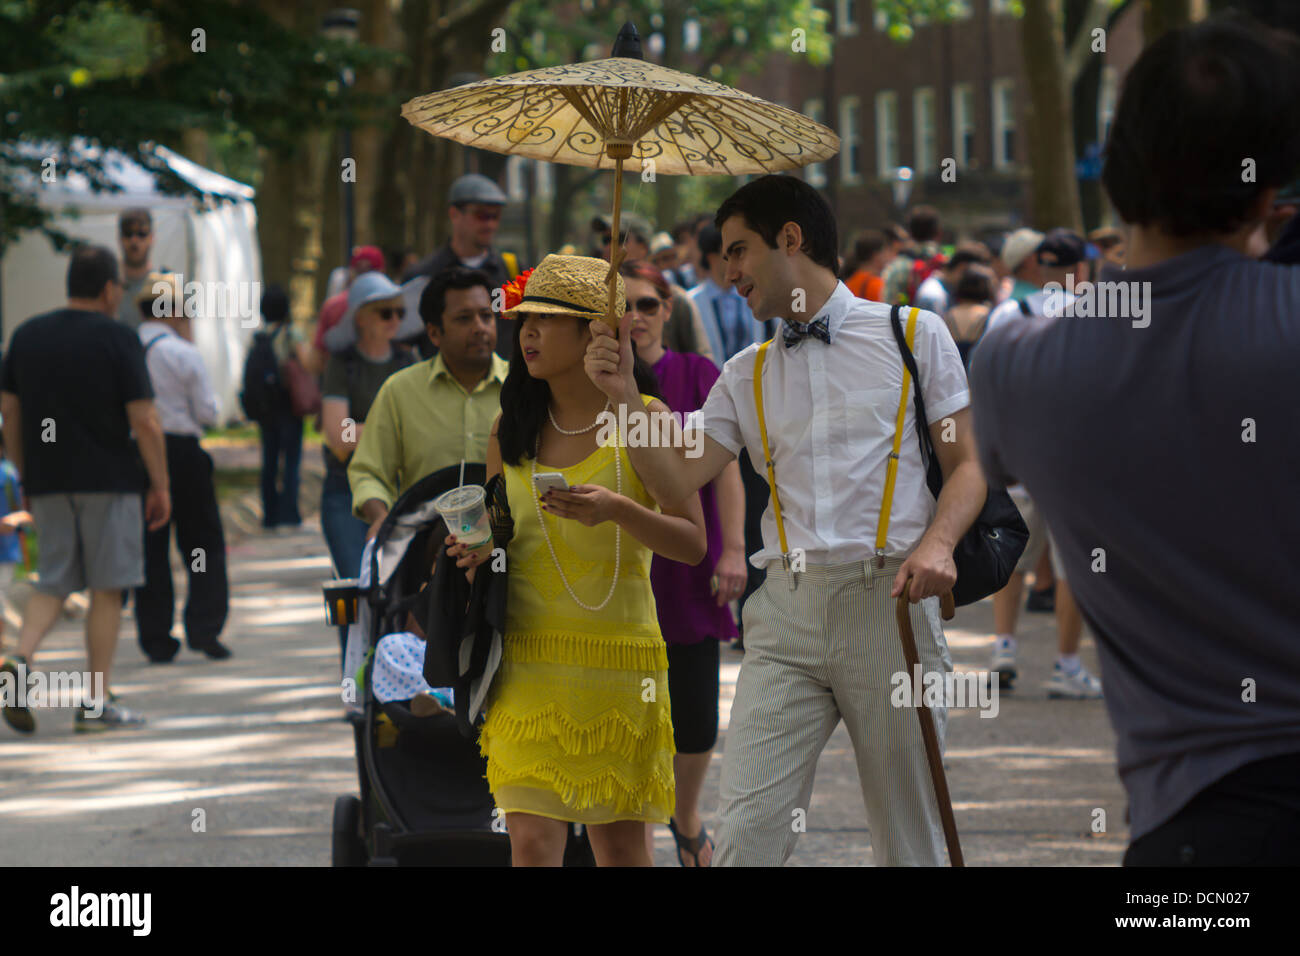 Participants dress up in costume for the 8th Bi-Annual Jazz Age Lawn Party on Governor's Island in New York Stock Photo